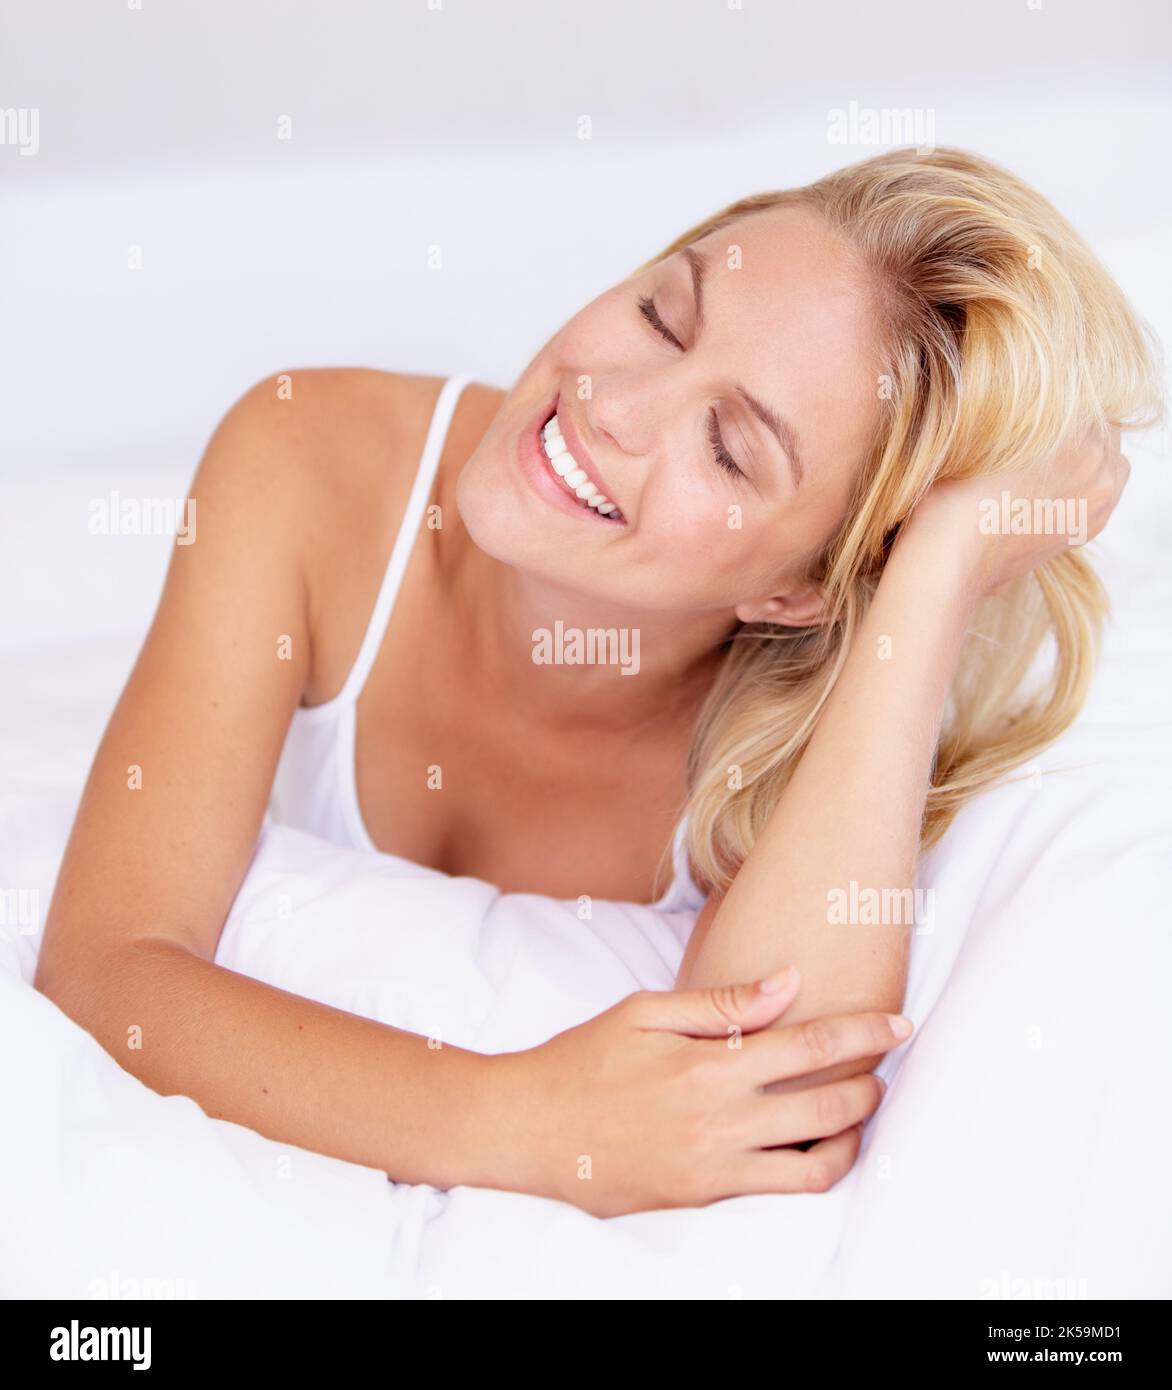 Relieved that she can finally relax. A beautiful young woman lying on her bed. Stock Photo